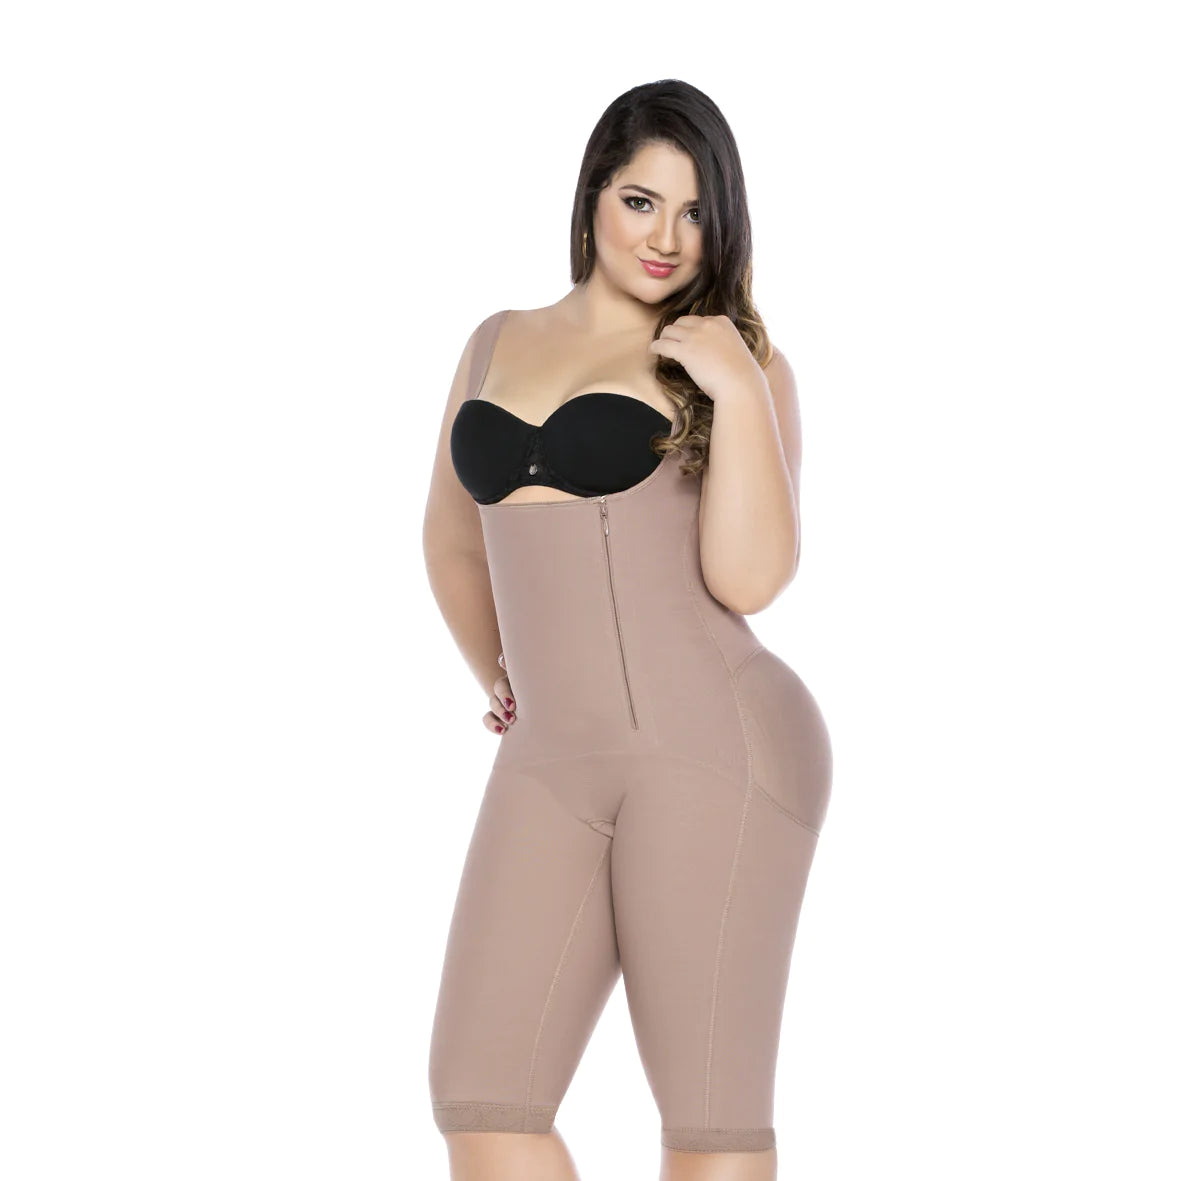 Alisum Faja Post-Surgical Stage 2 / Daily Wear / Post-Partum #3018 – Ruby  Hourglass Shapewear